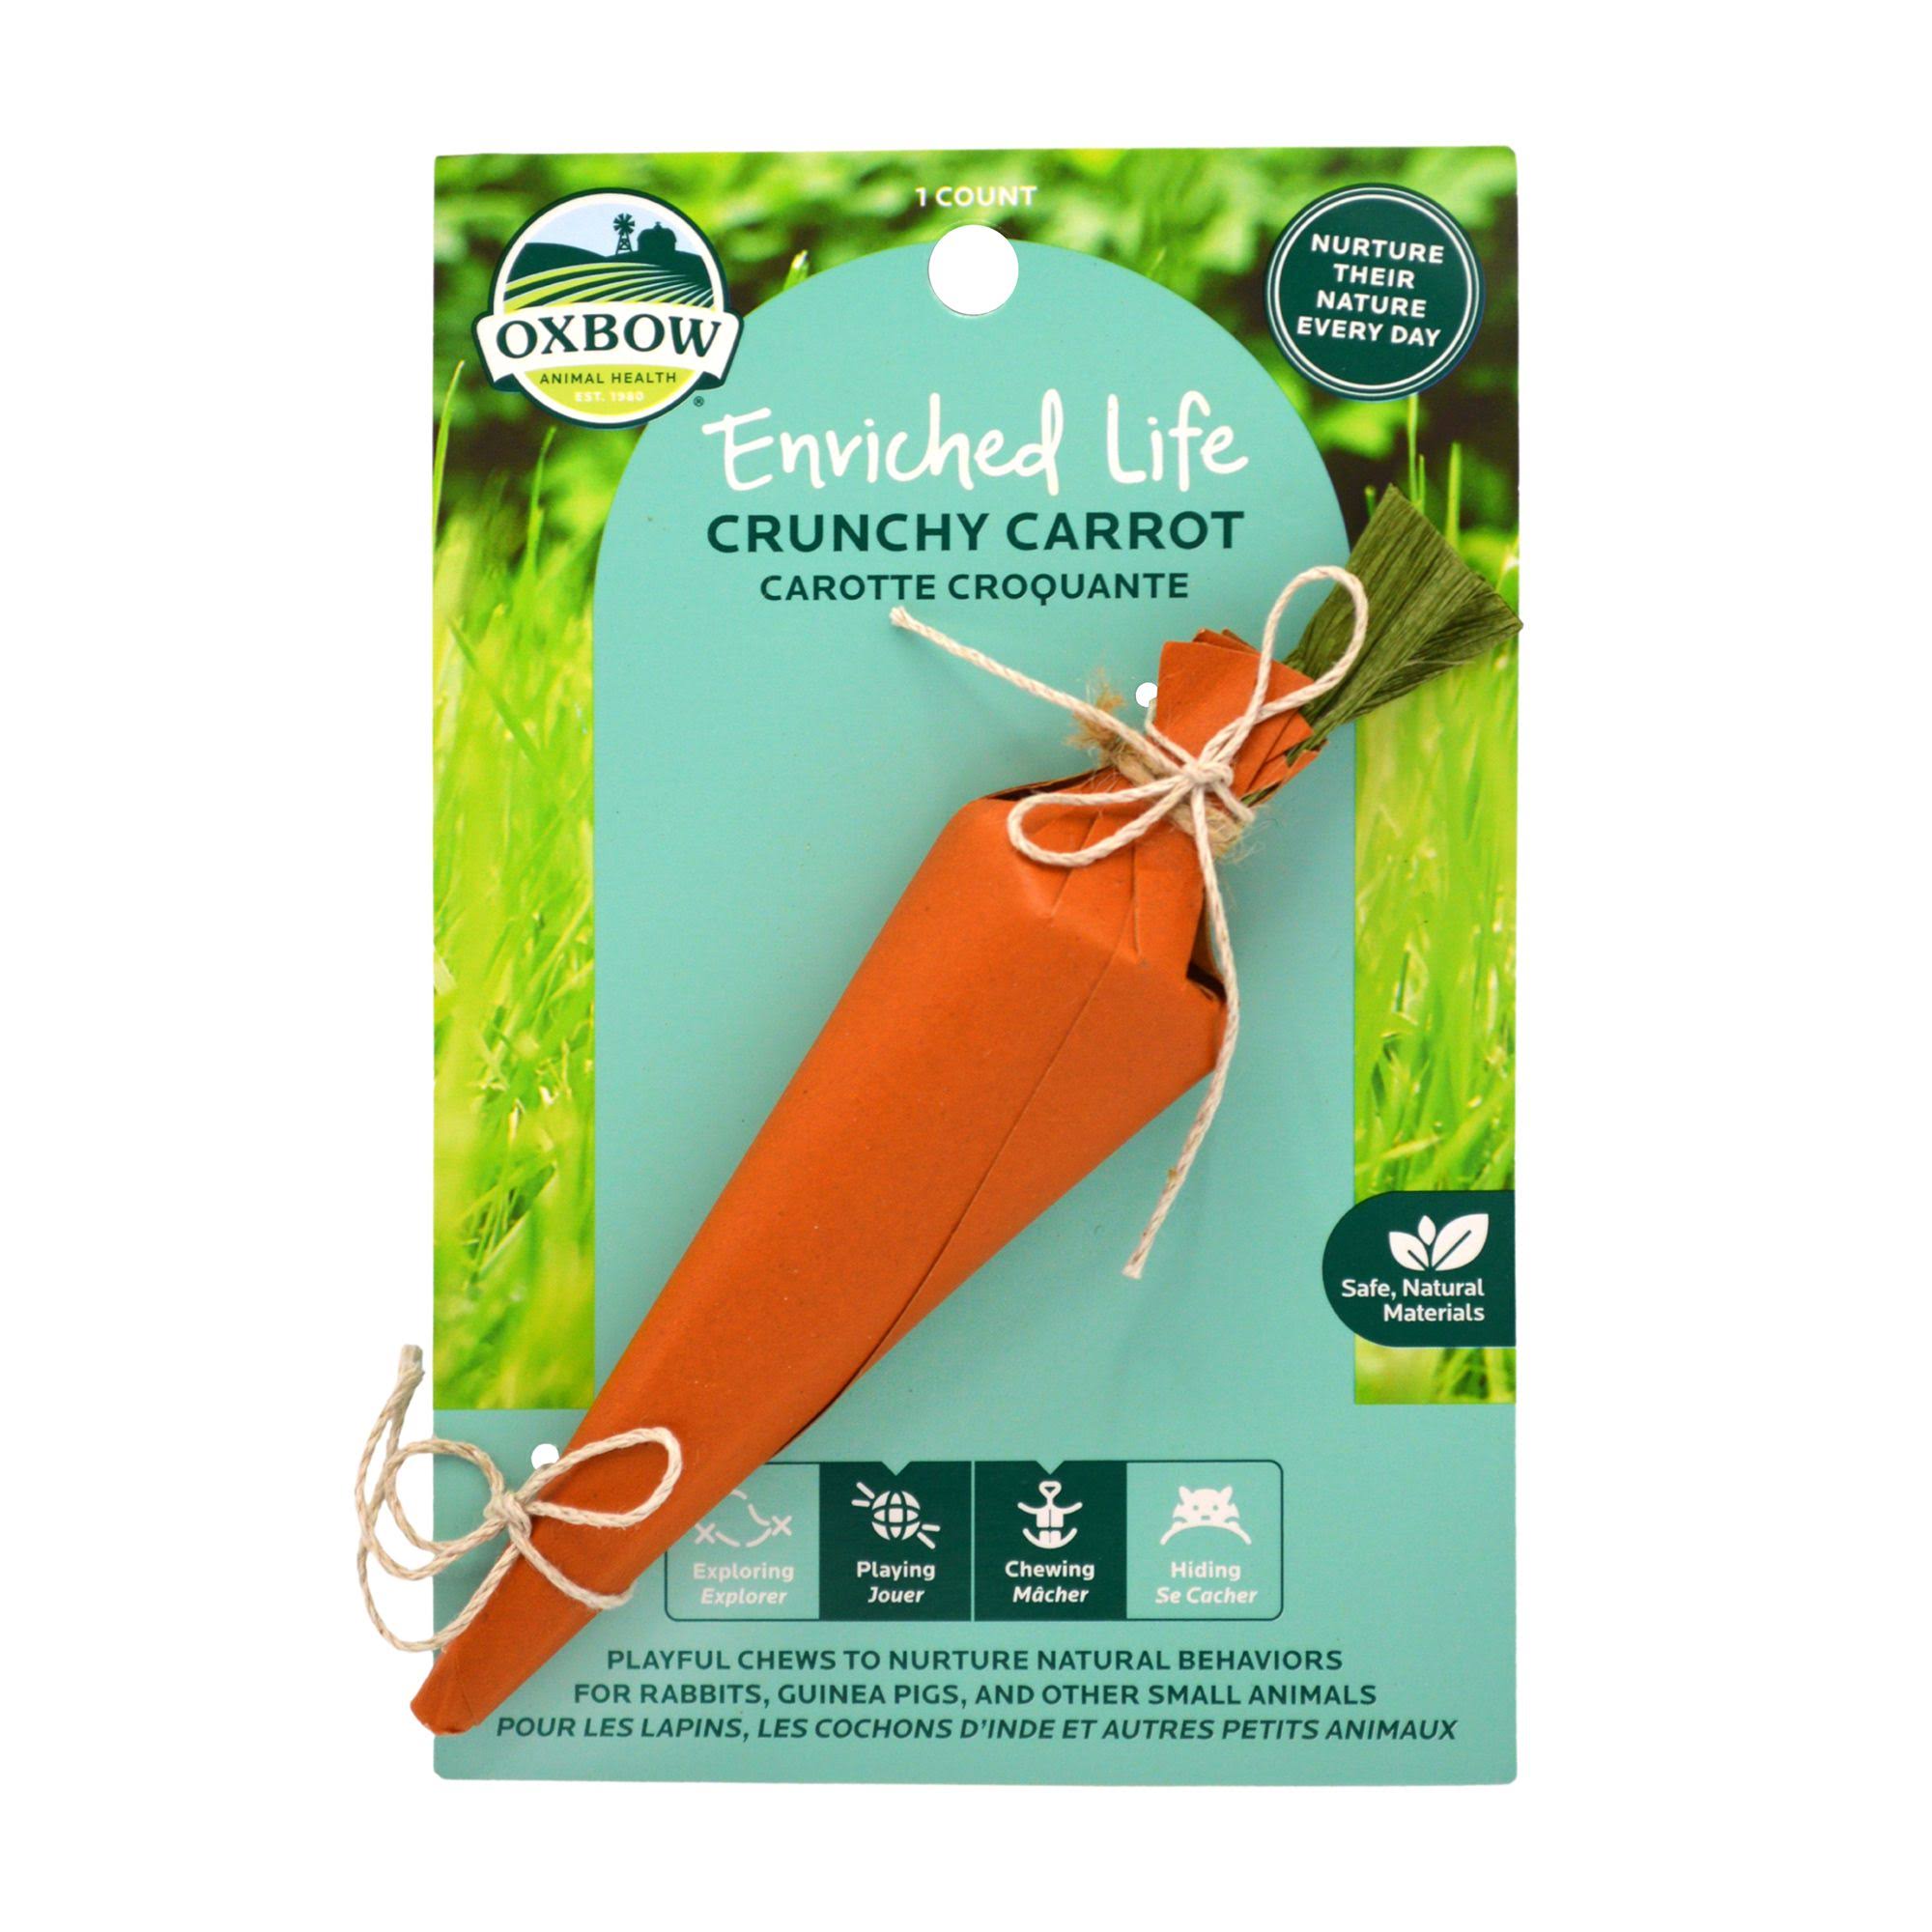 Oxbow - Enriched Life - Crunchy Carrot